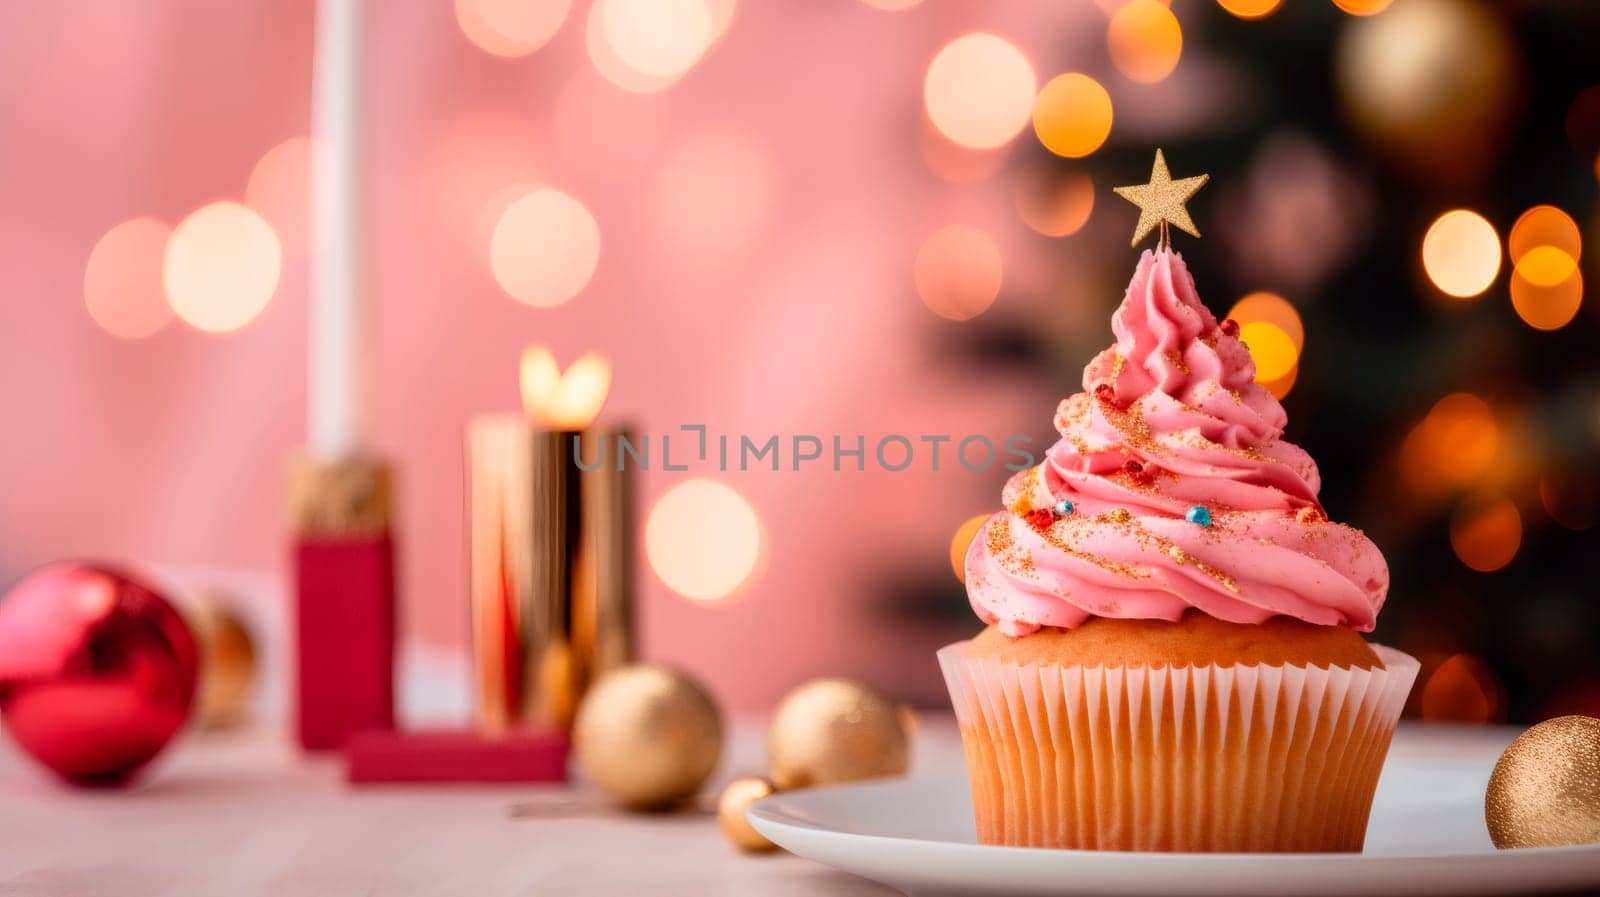 One delicious cupcake with pink cream, candy sprinkles, a candle and Christmas tree decorations stands on the table against a background of blurry bokeh lights, close-up side view.